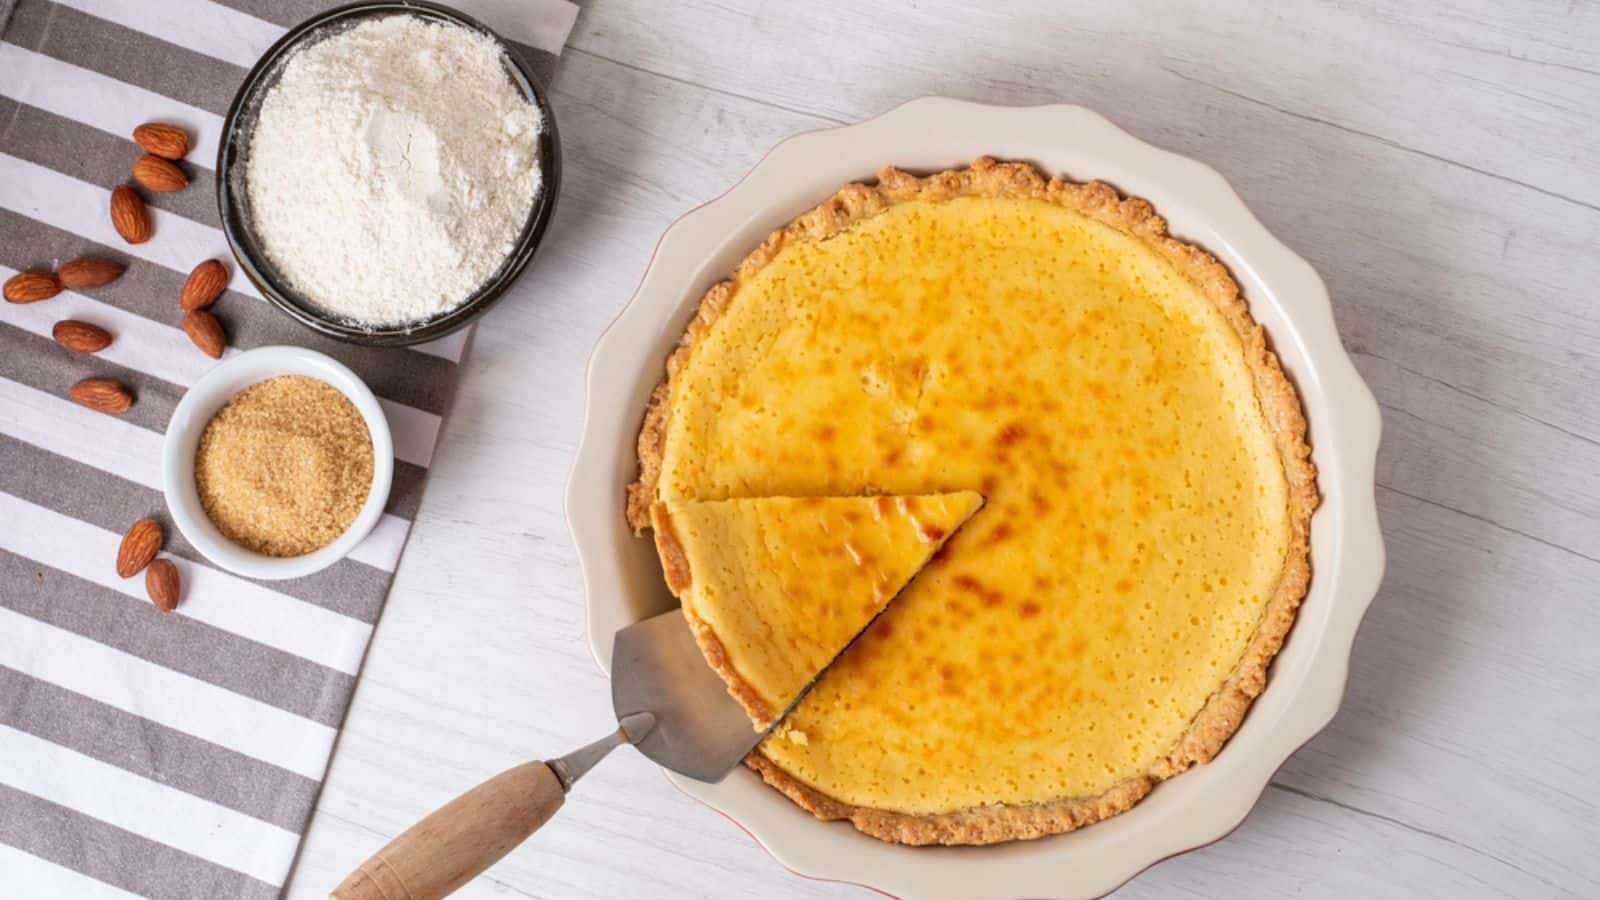 Baked sweet cheesecake with cooking ingredients on kitchen